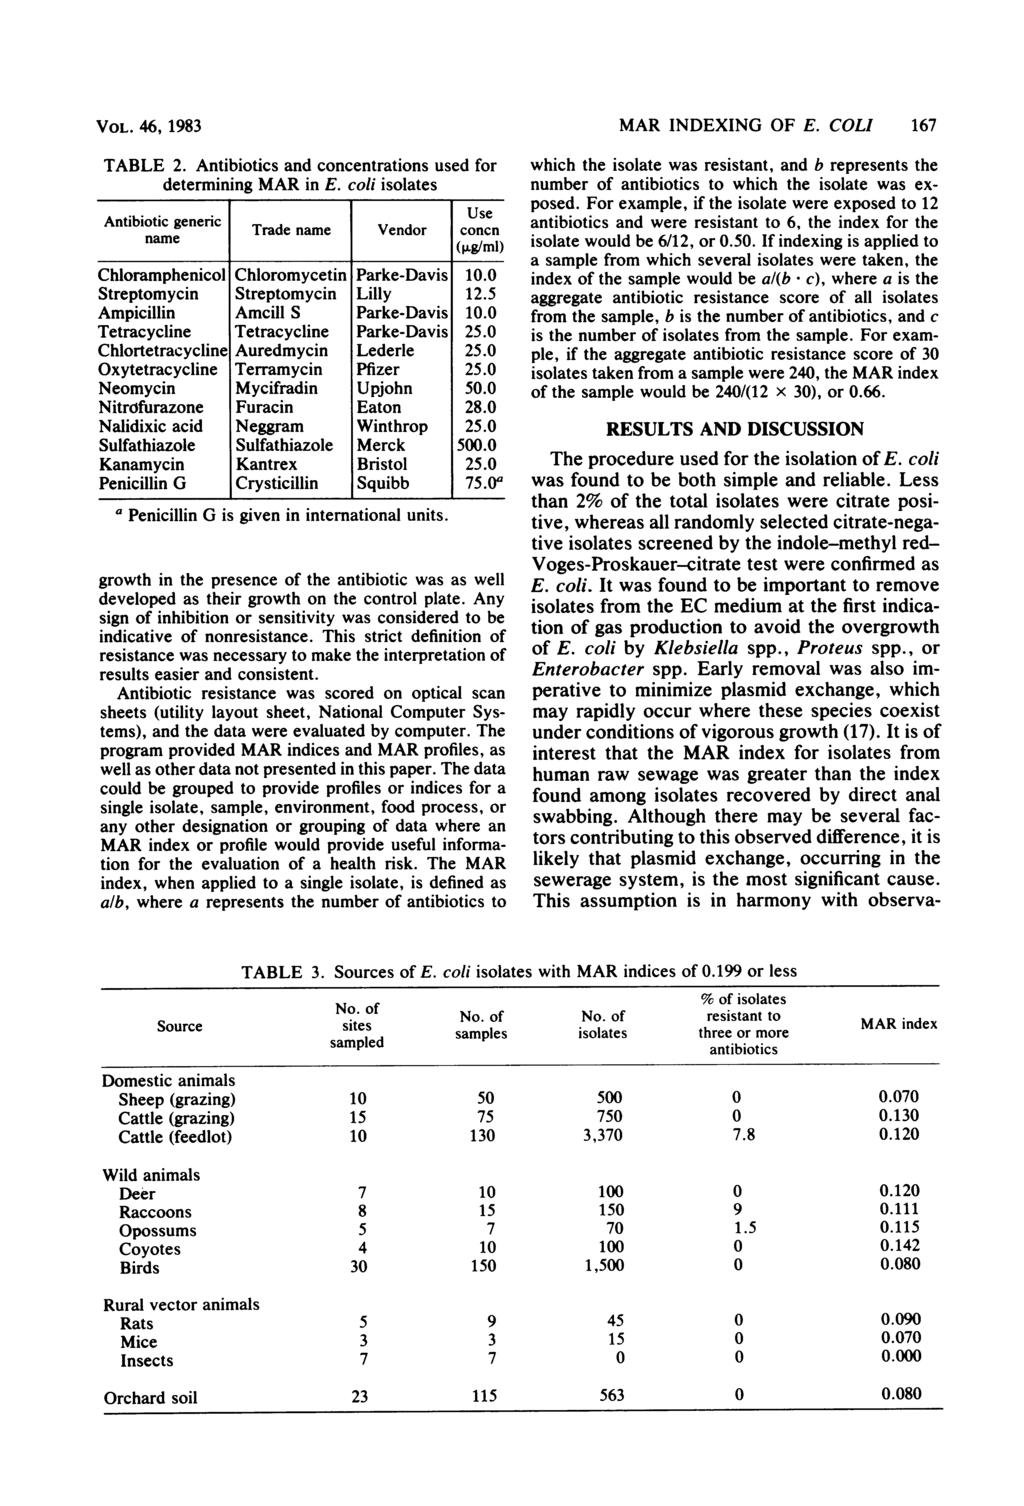 VOL. 46, 1983 TABLE 2. Antibiotics and concentrations used for determining MAR in E.